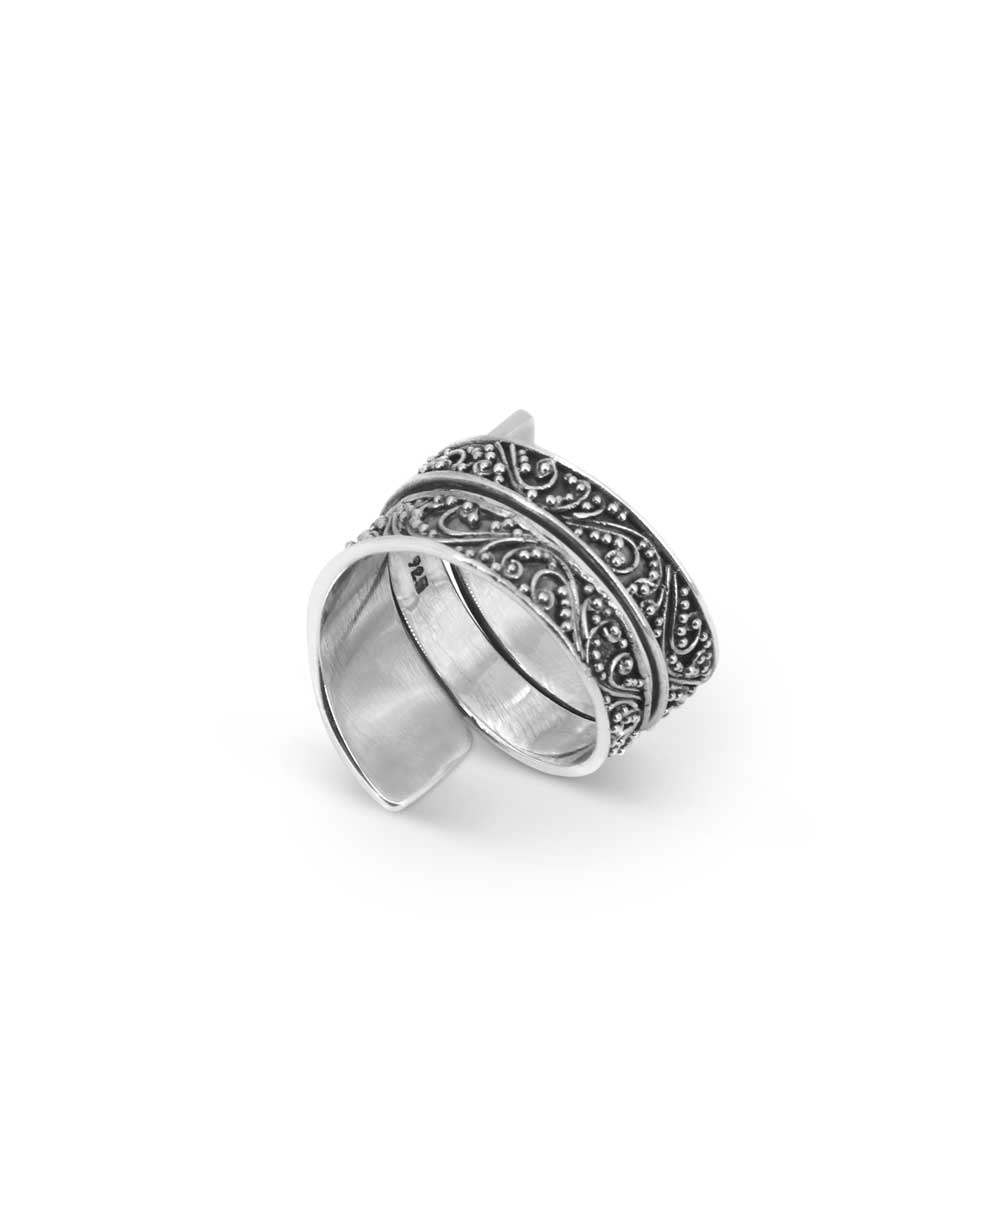 Wide band filigree silver ring